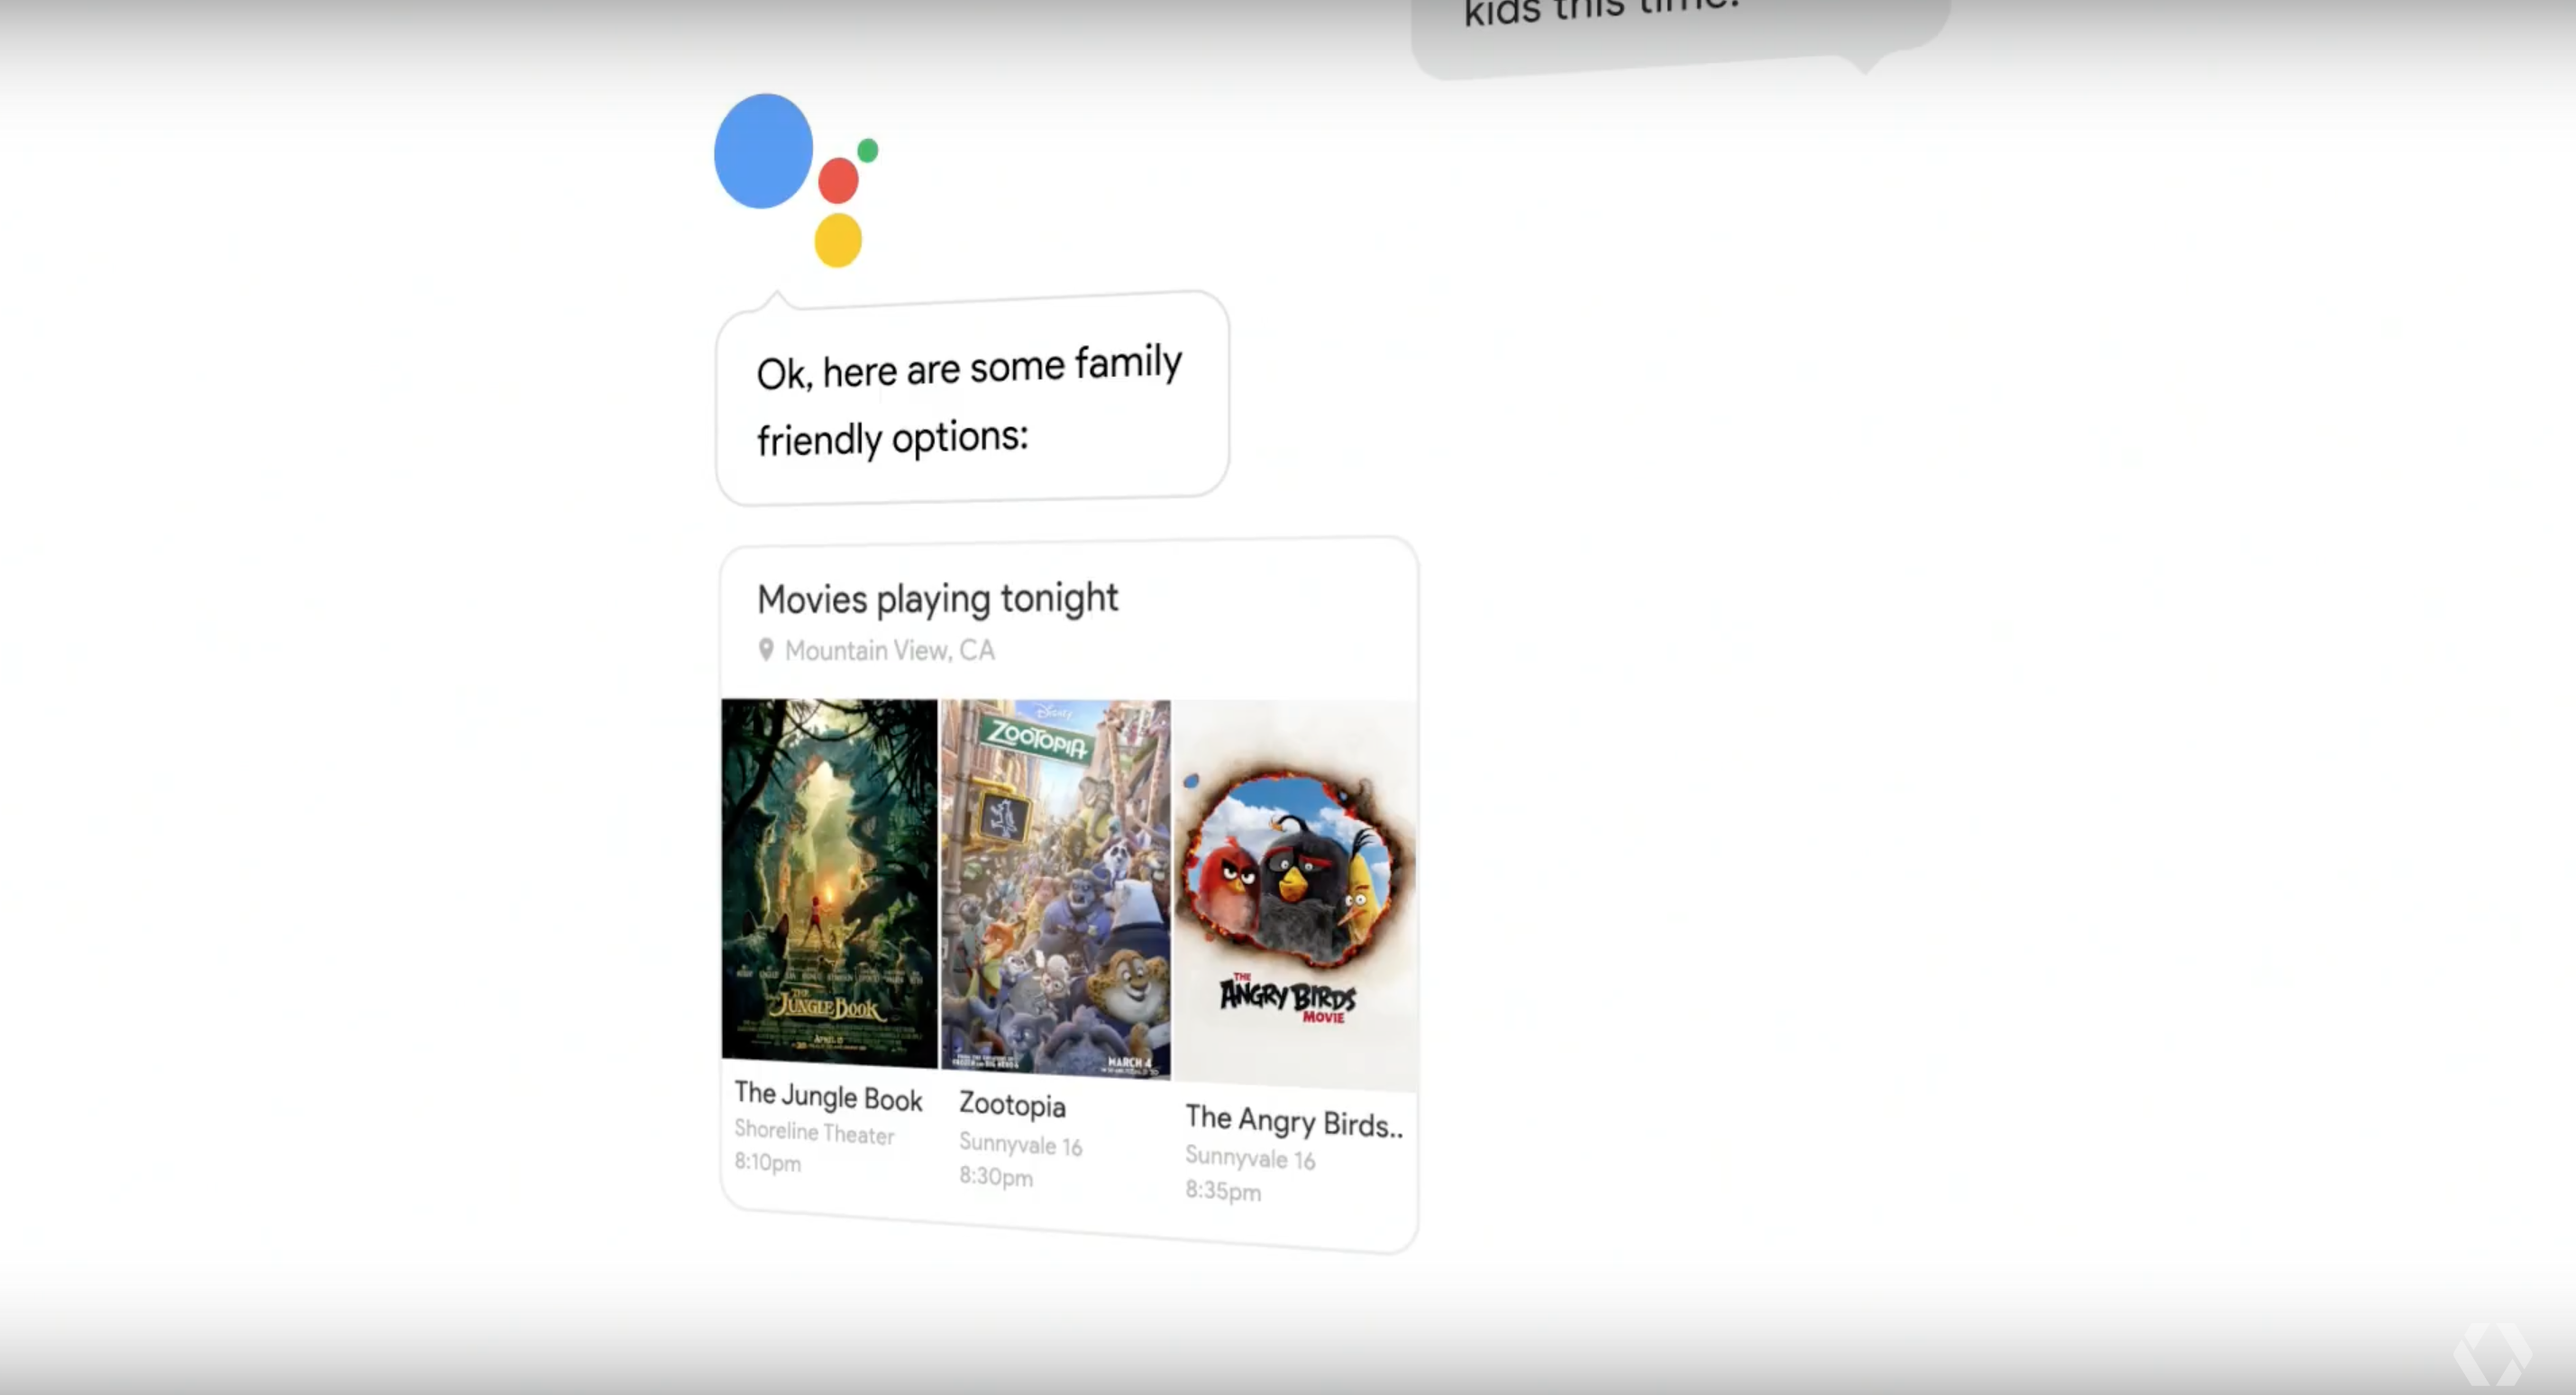 Google Assistant in chat.